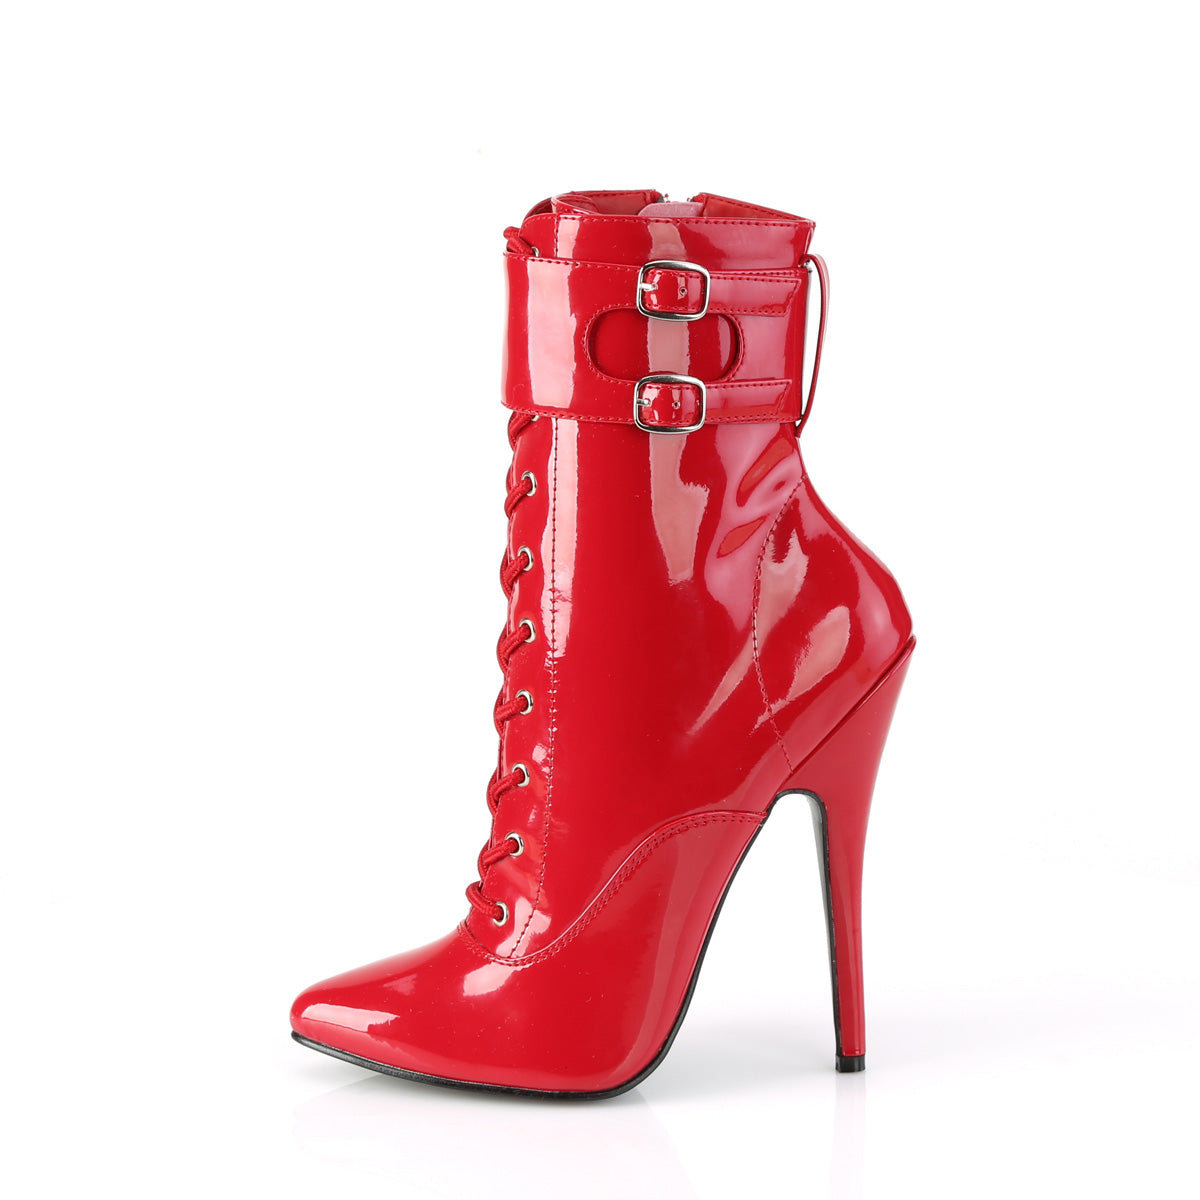 Devious  Ankle Boots DOMINA-1023 Red Pat